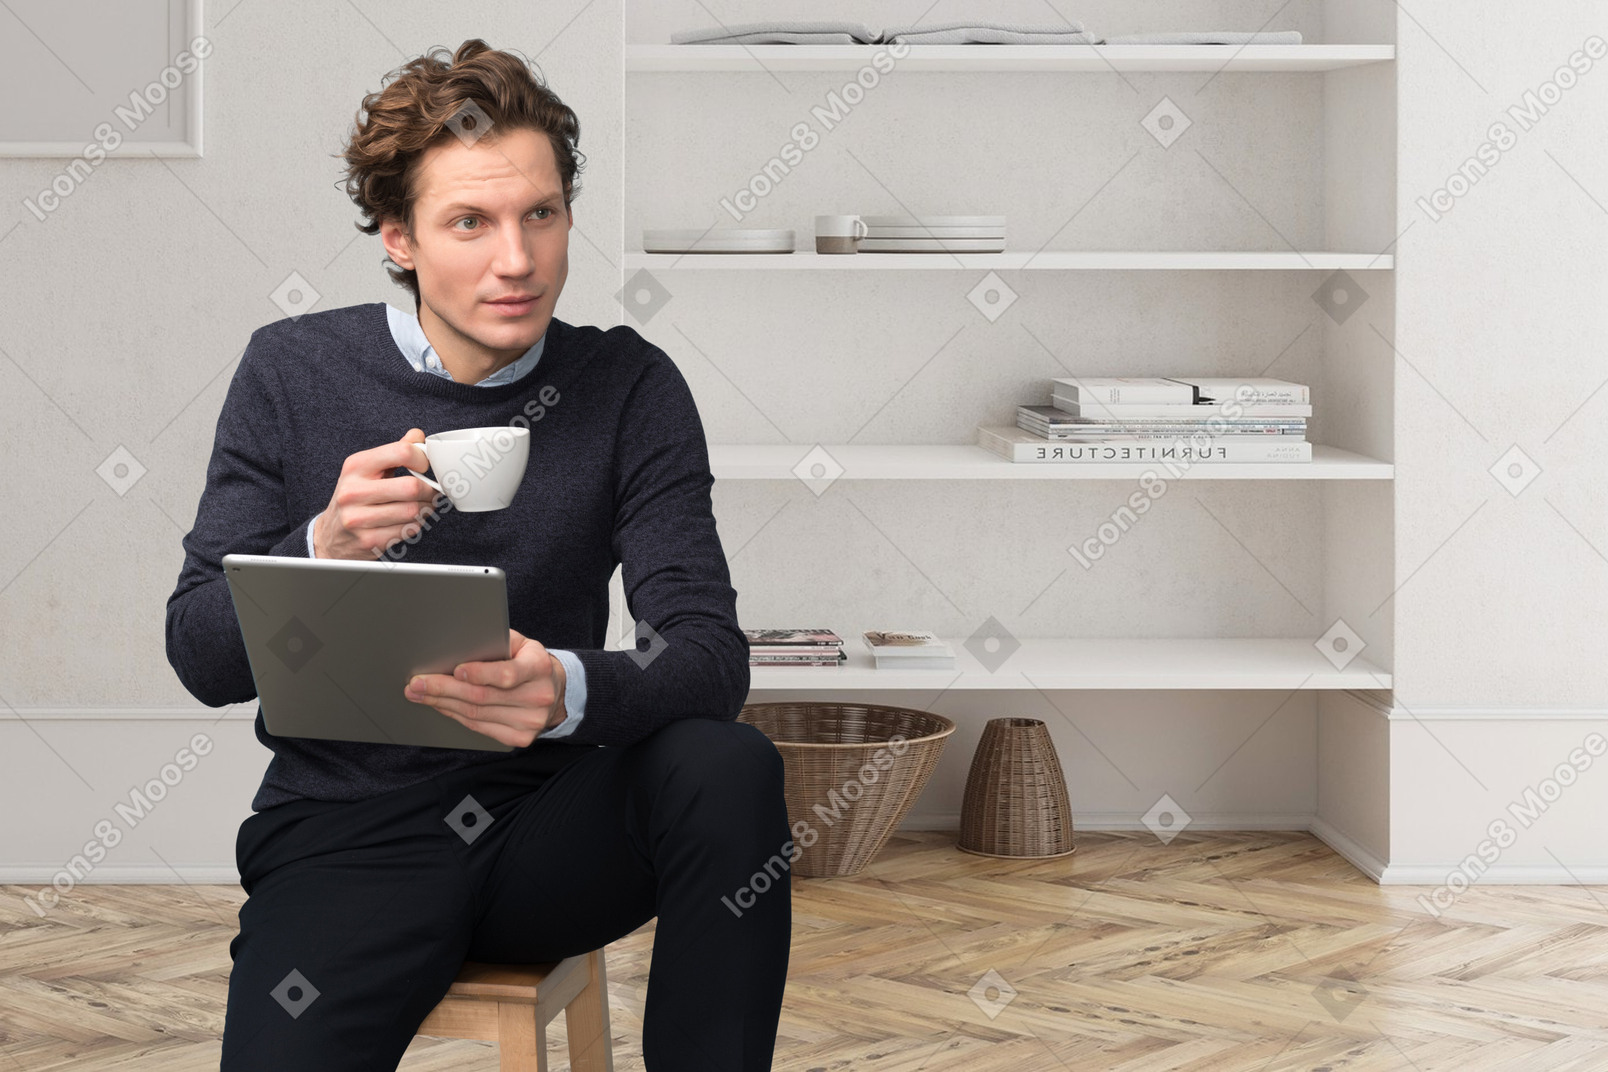 A man sitting on a stool holding a cup of coffee